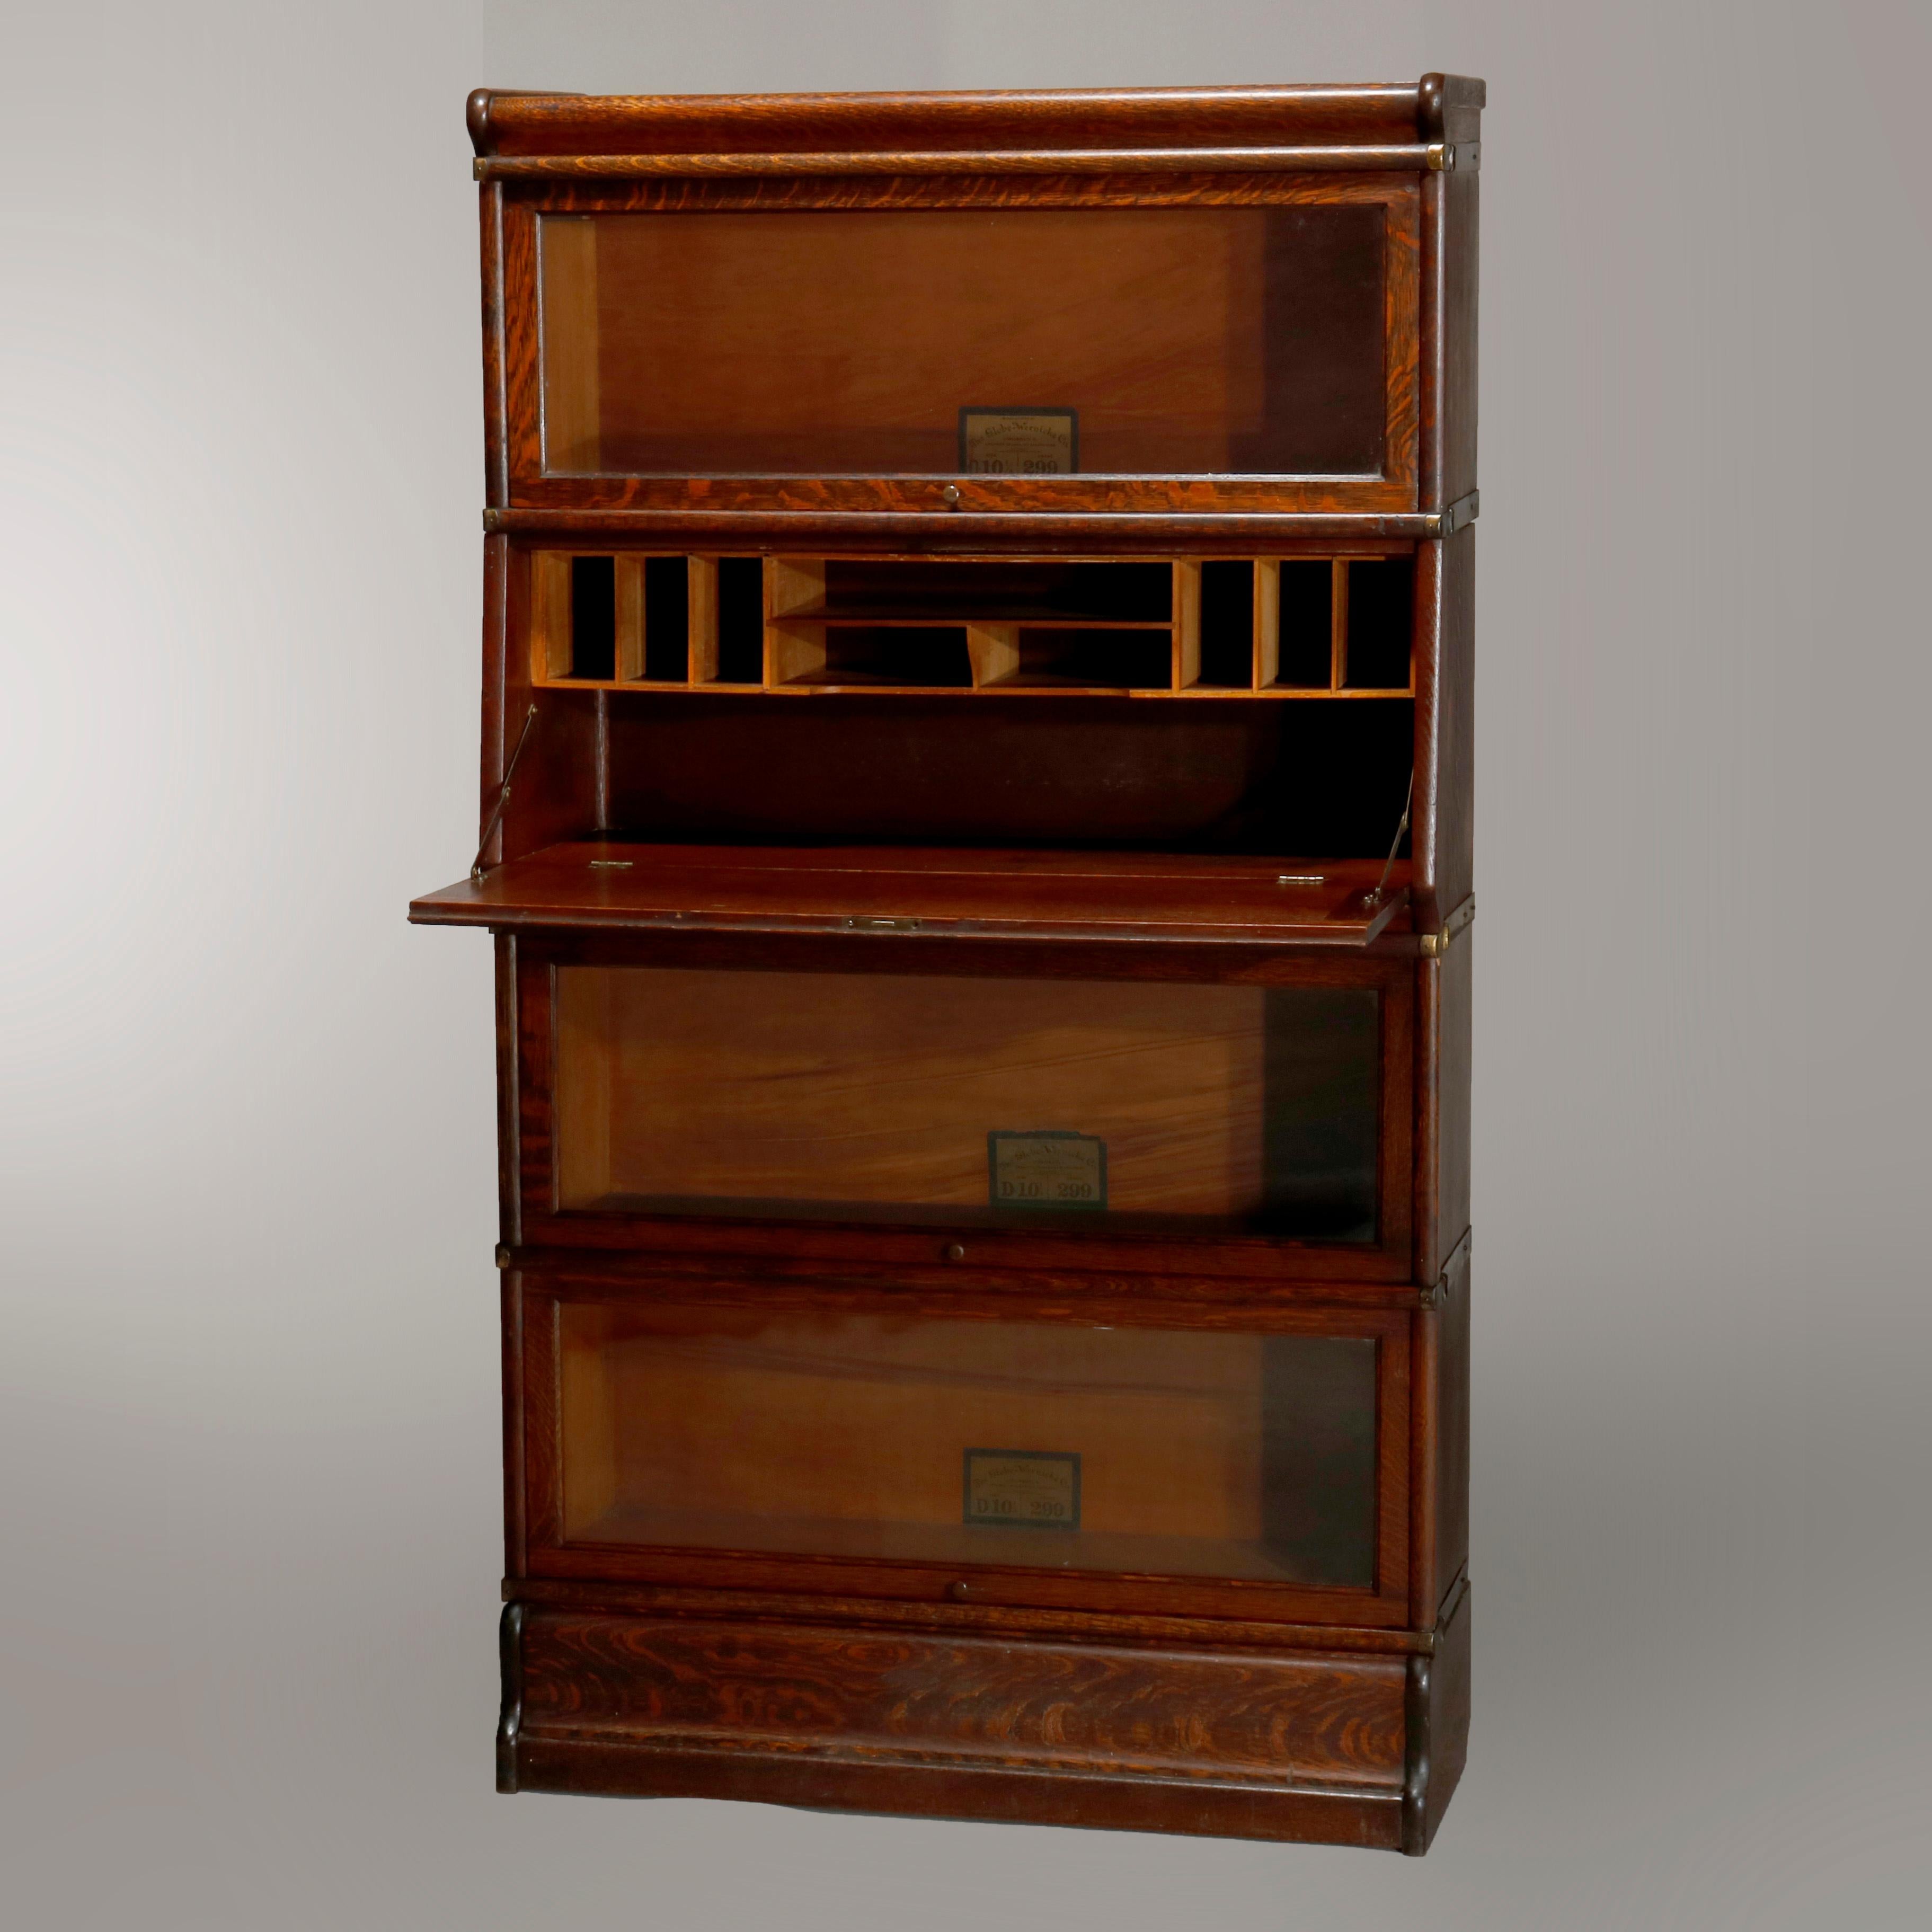 An antique Arts & Crafts Mission Barrister stacking bookcase by Globe Wernicke offers oak construction with four sections having pull-out glass doors and drop desk interior, original labels as photographed, circa 1910.

Measures: 61.5